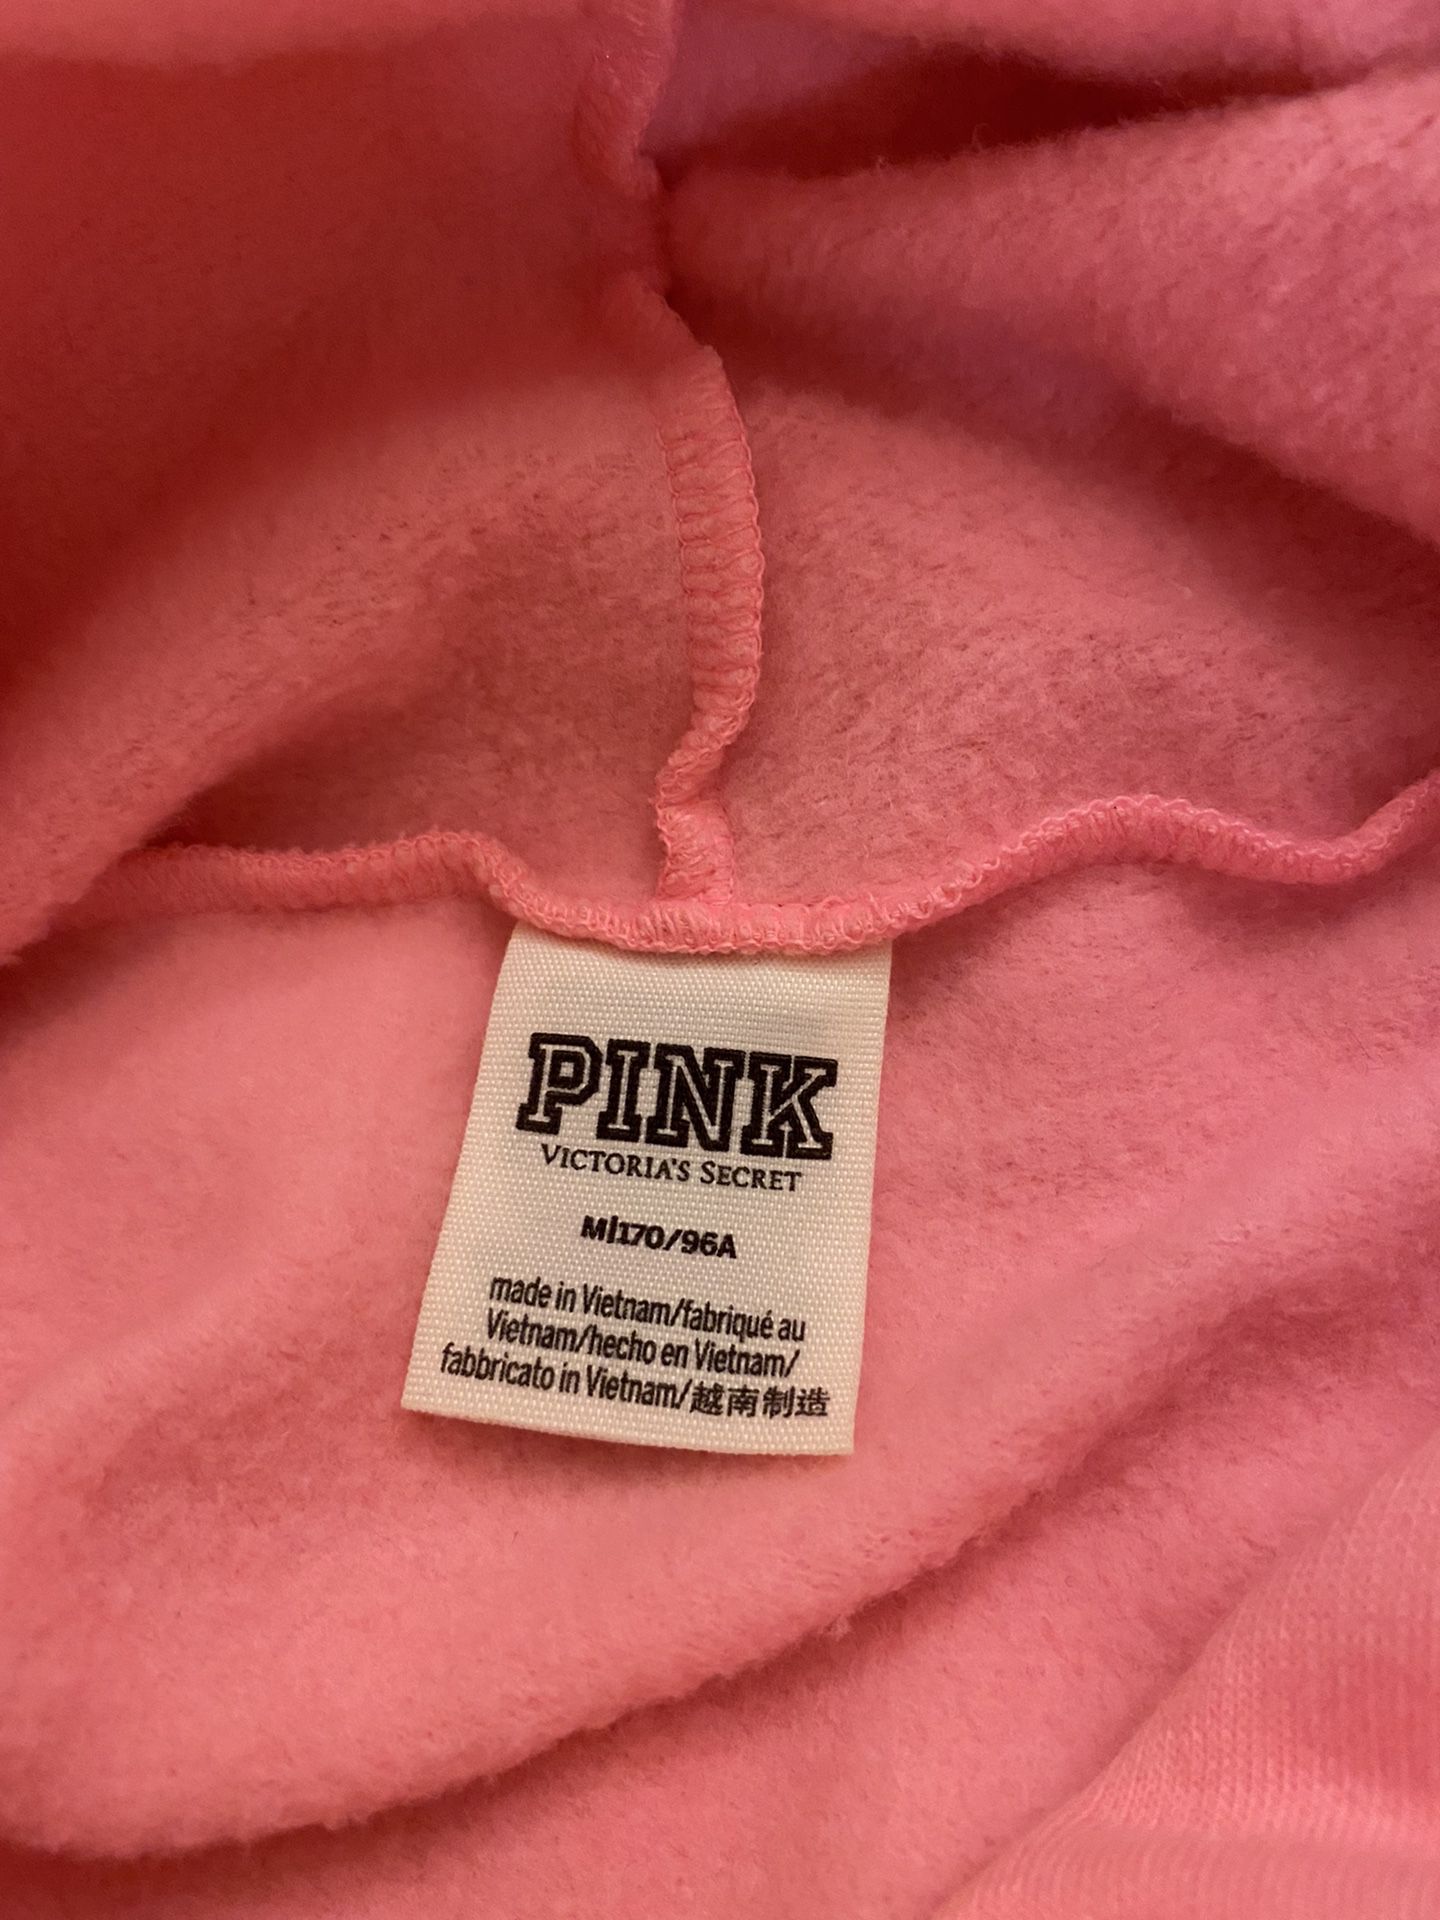 Pink Cropped Hoodie From Victoria’s Secret PINK, Size Medium